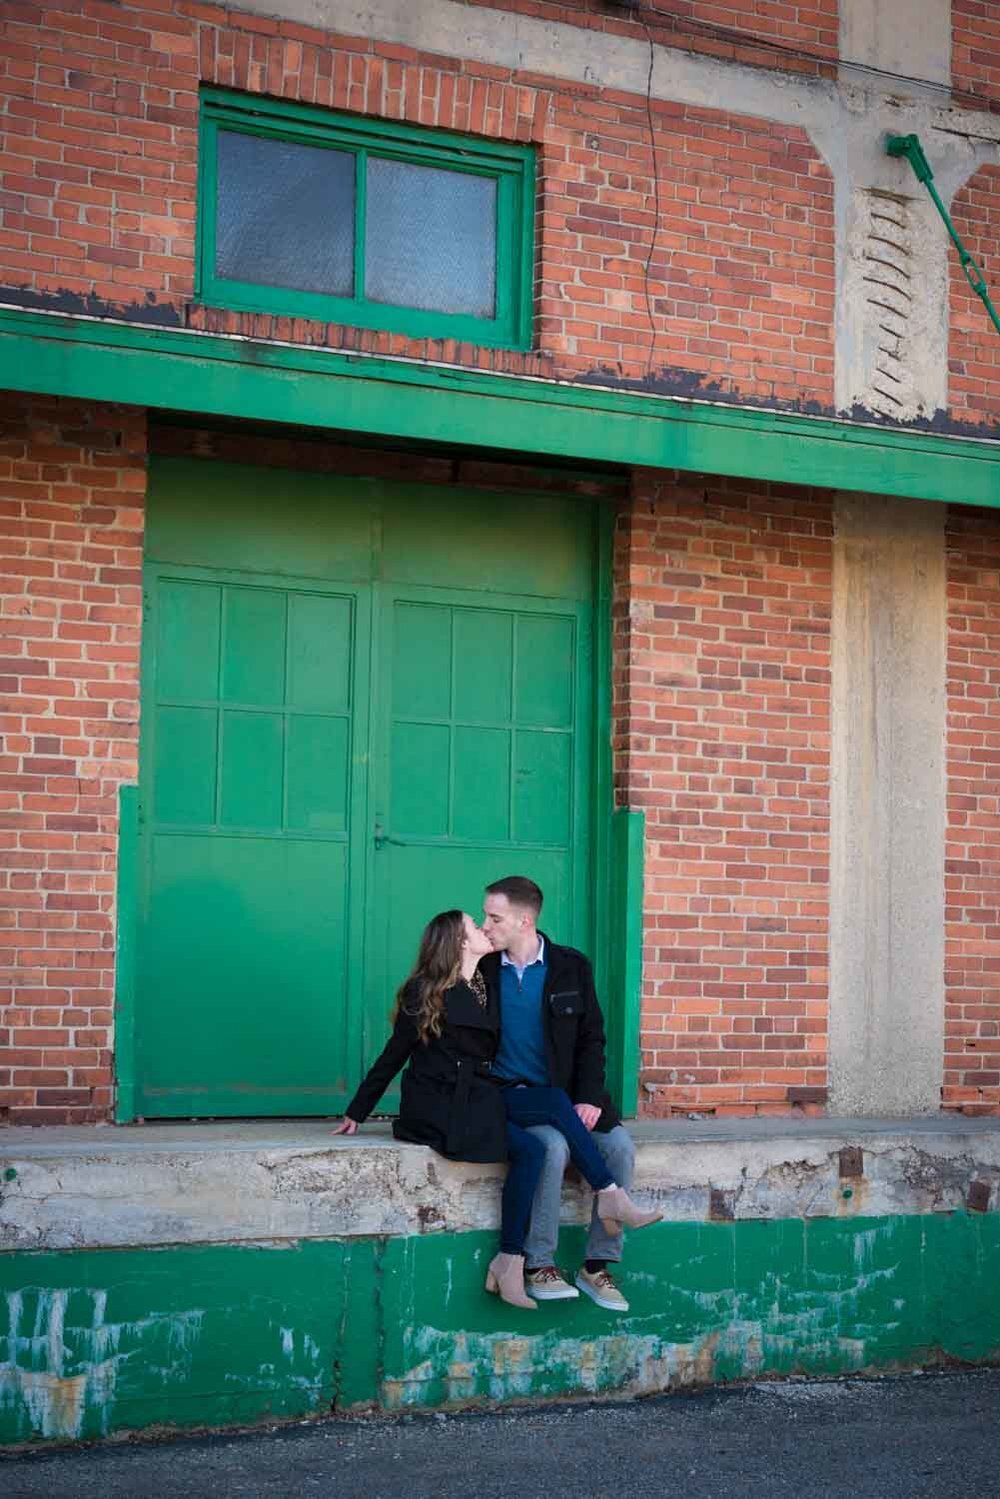 Webster Station Cannery Loft Apartments The Steam Plant Downtown Dayton Engagement Photo Locations